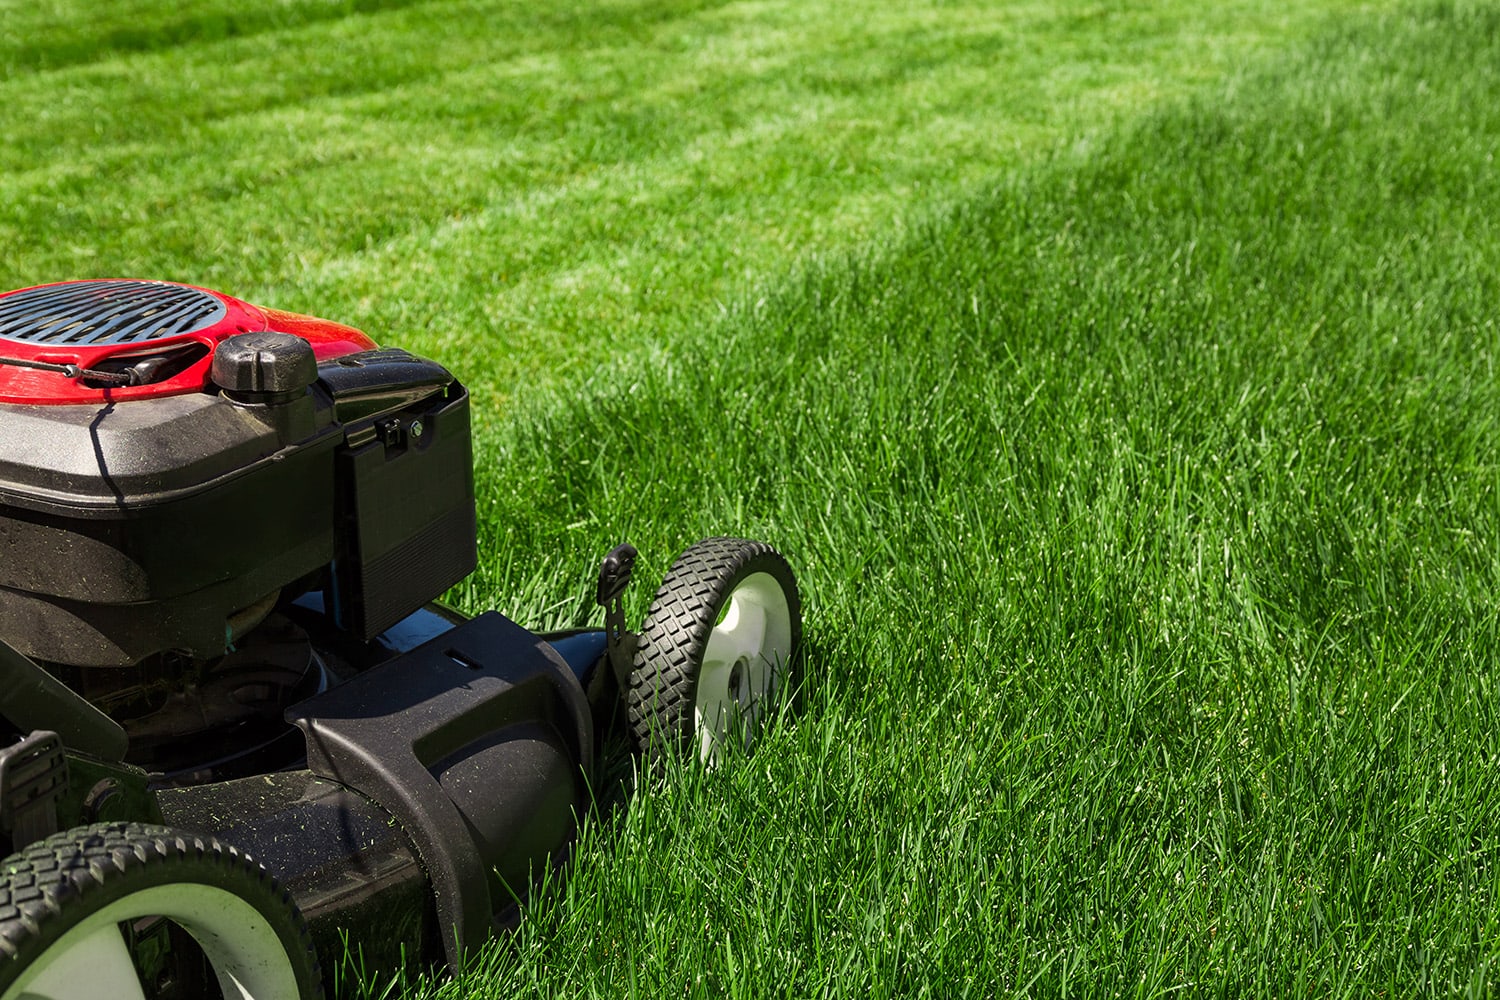 lawn care in salt lake county